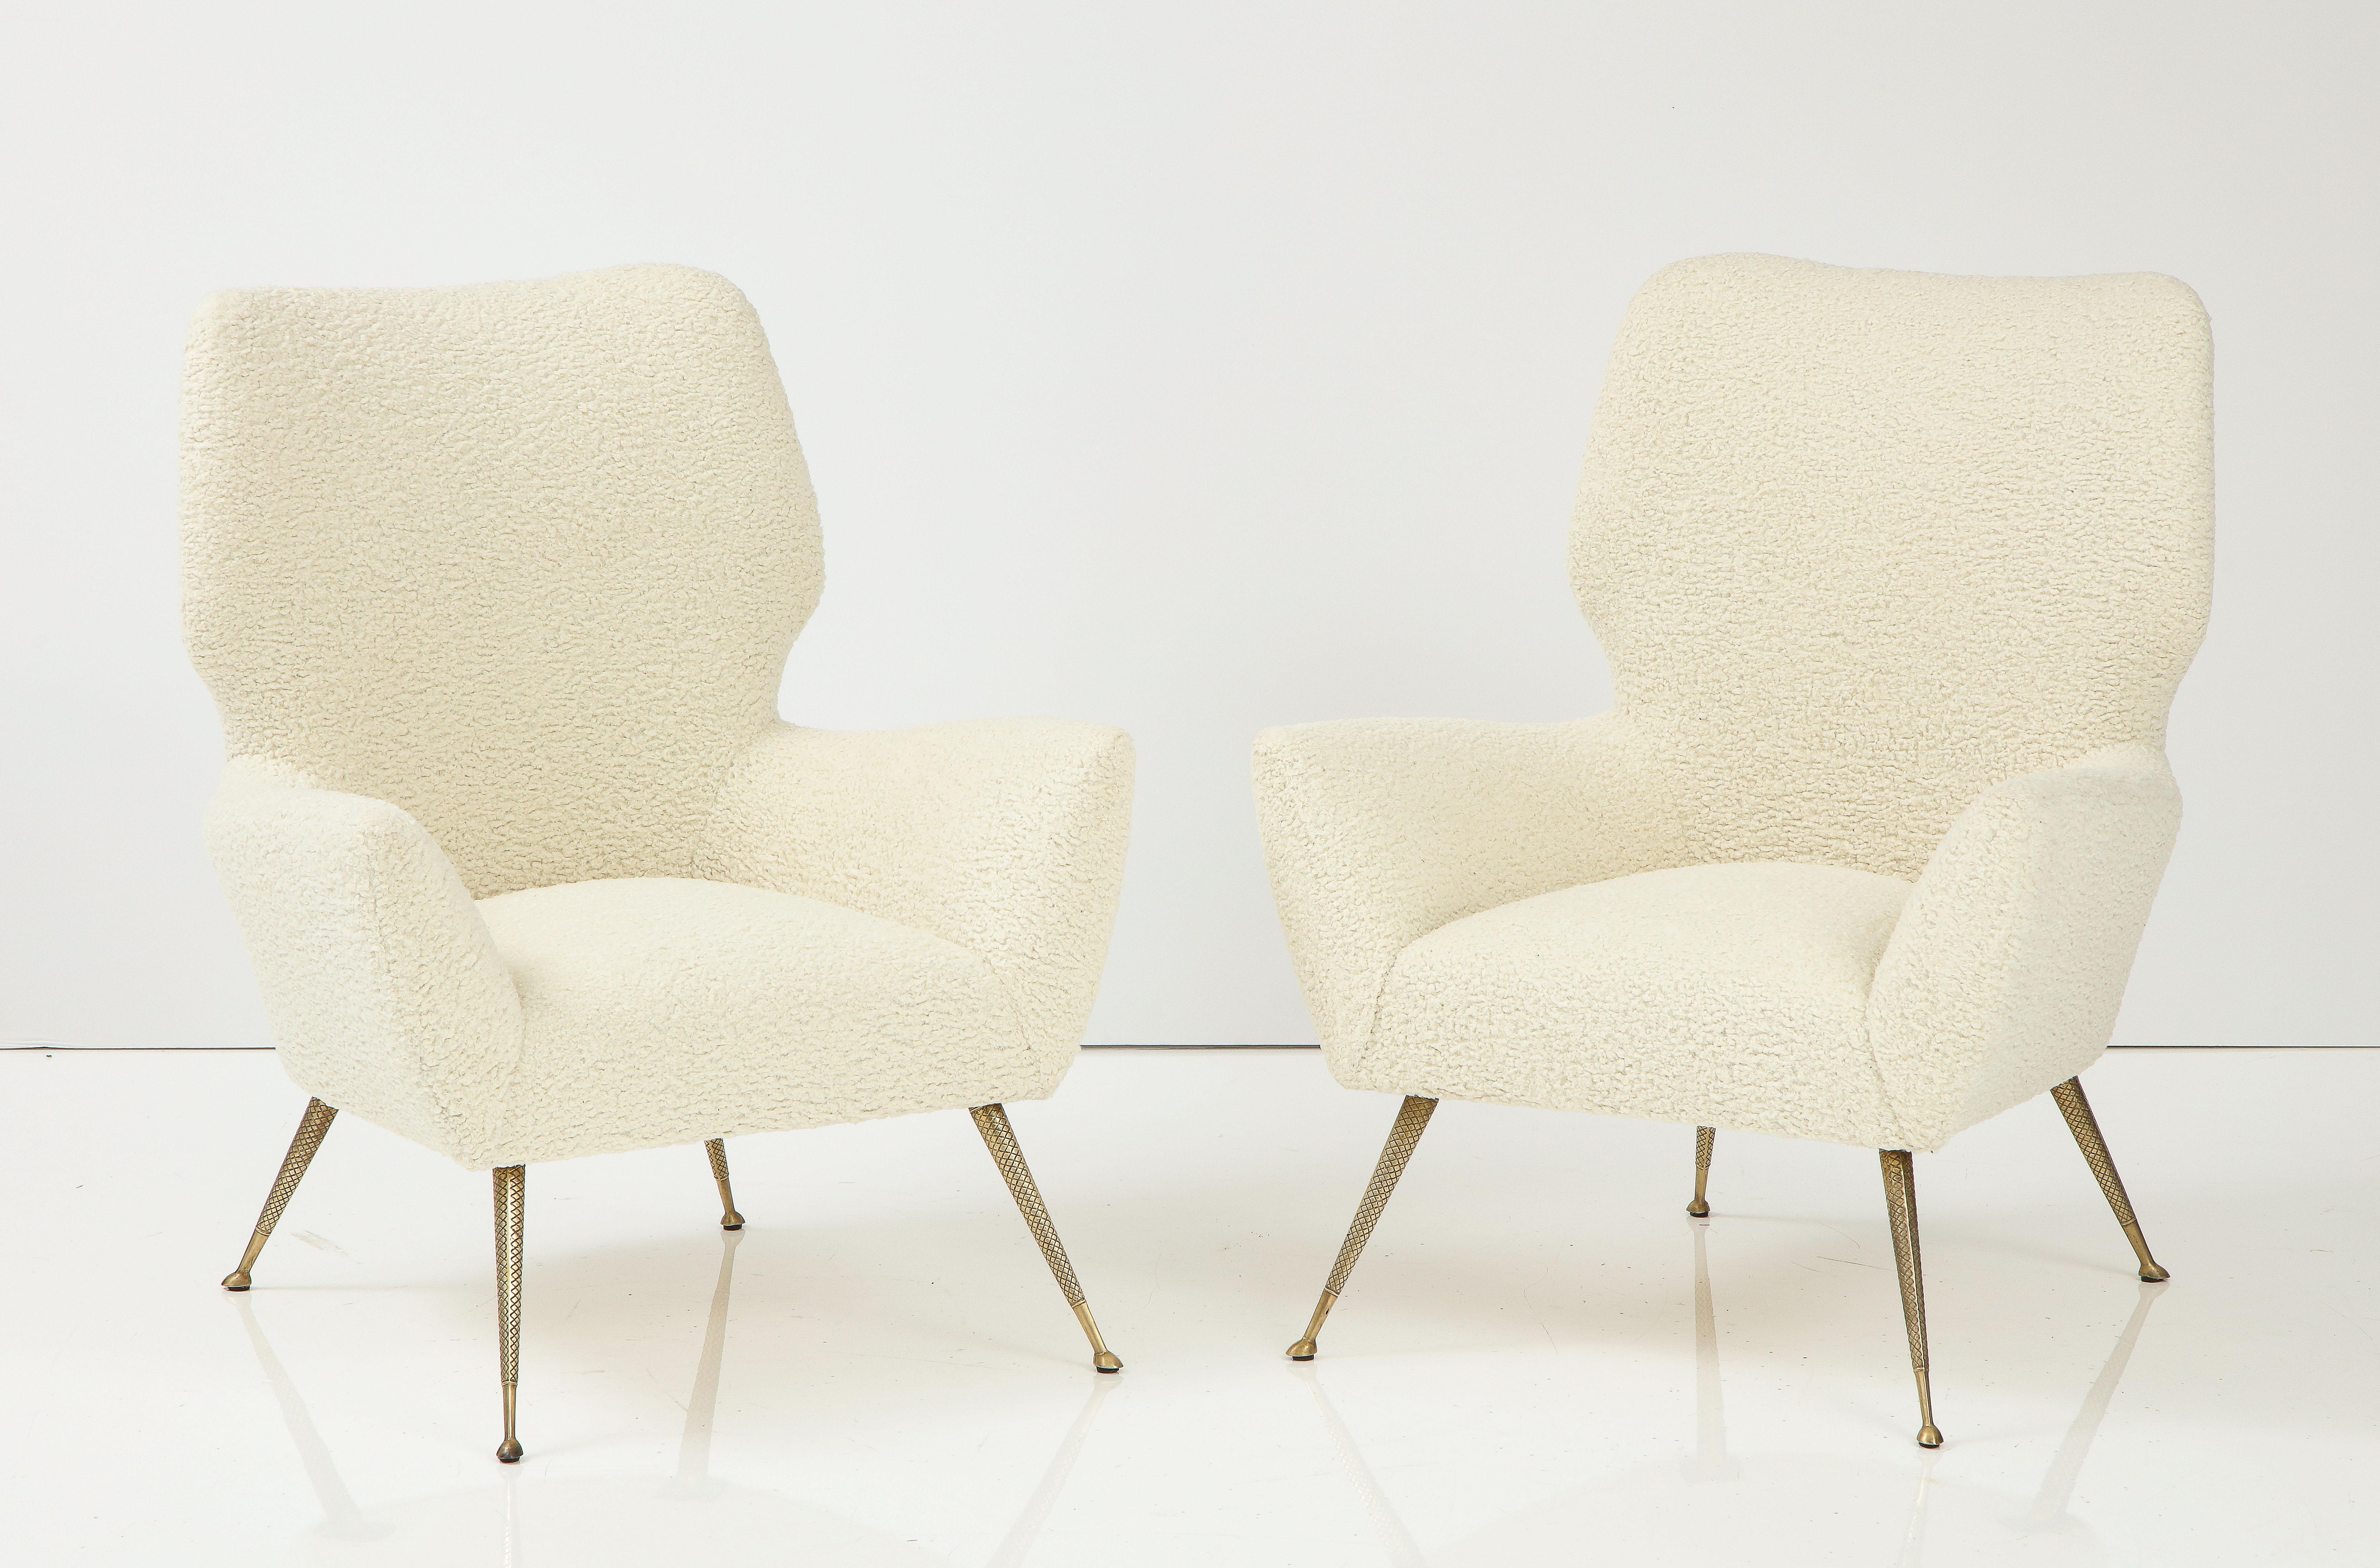 Italian Settee and pair of chairs with brass legs, Gio Ponti for Casa e Giardino.
A rare and unique living room suite of furniture, consisting of a settee and pair of chairs. The settee and pair of chairs with curved, elegantly shaped back and arms